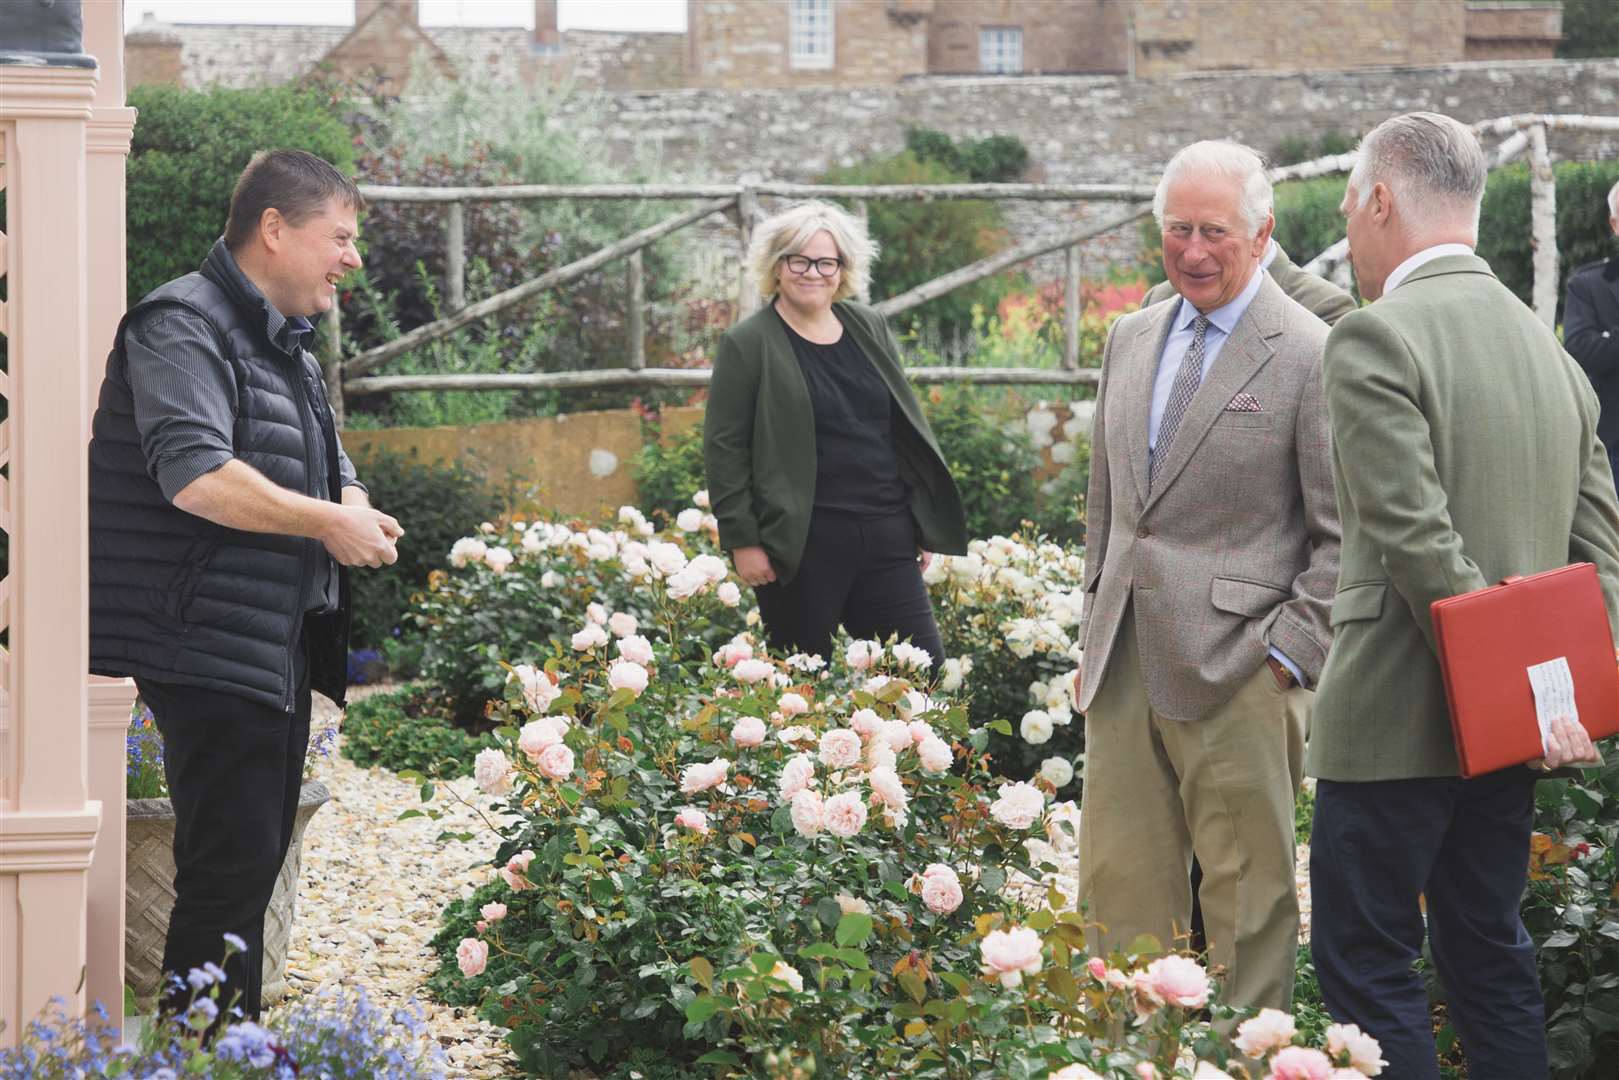 Andrew Mowat (left) of John O’Groats Community Trust meeting the Duke of Rothesay at the Castle of Mey yesterday, with Joan Lawrie of Thurso Community Development Trust looking on along with Robert Lovie of the Prince’s Foundation. Picture: Colin Campbell